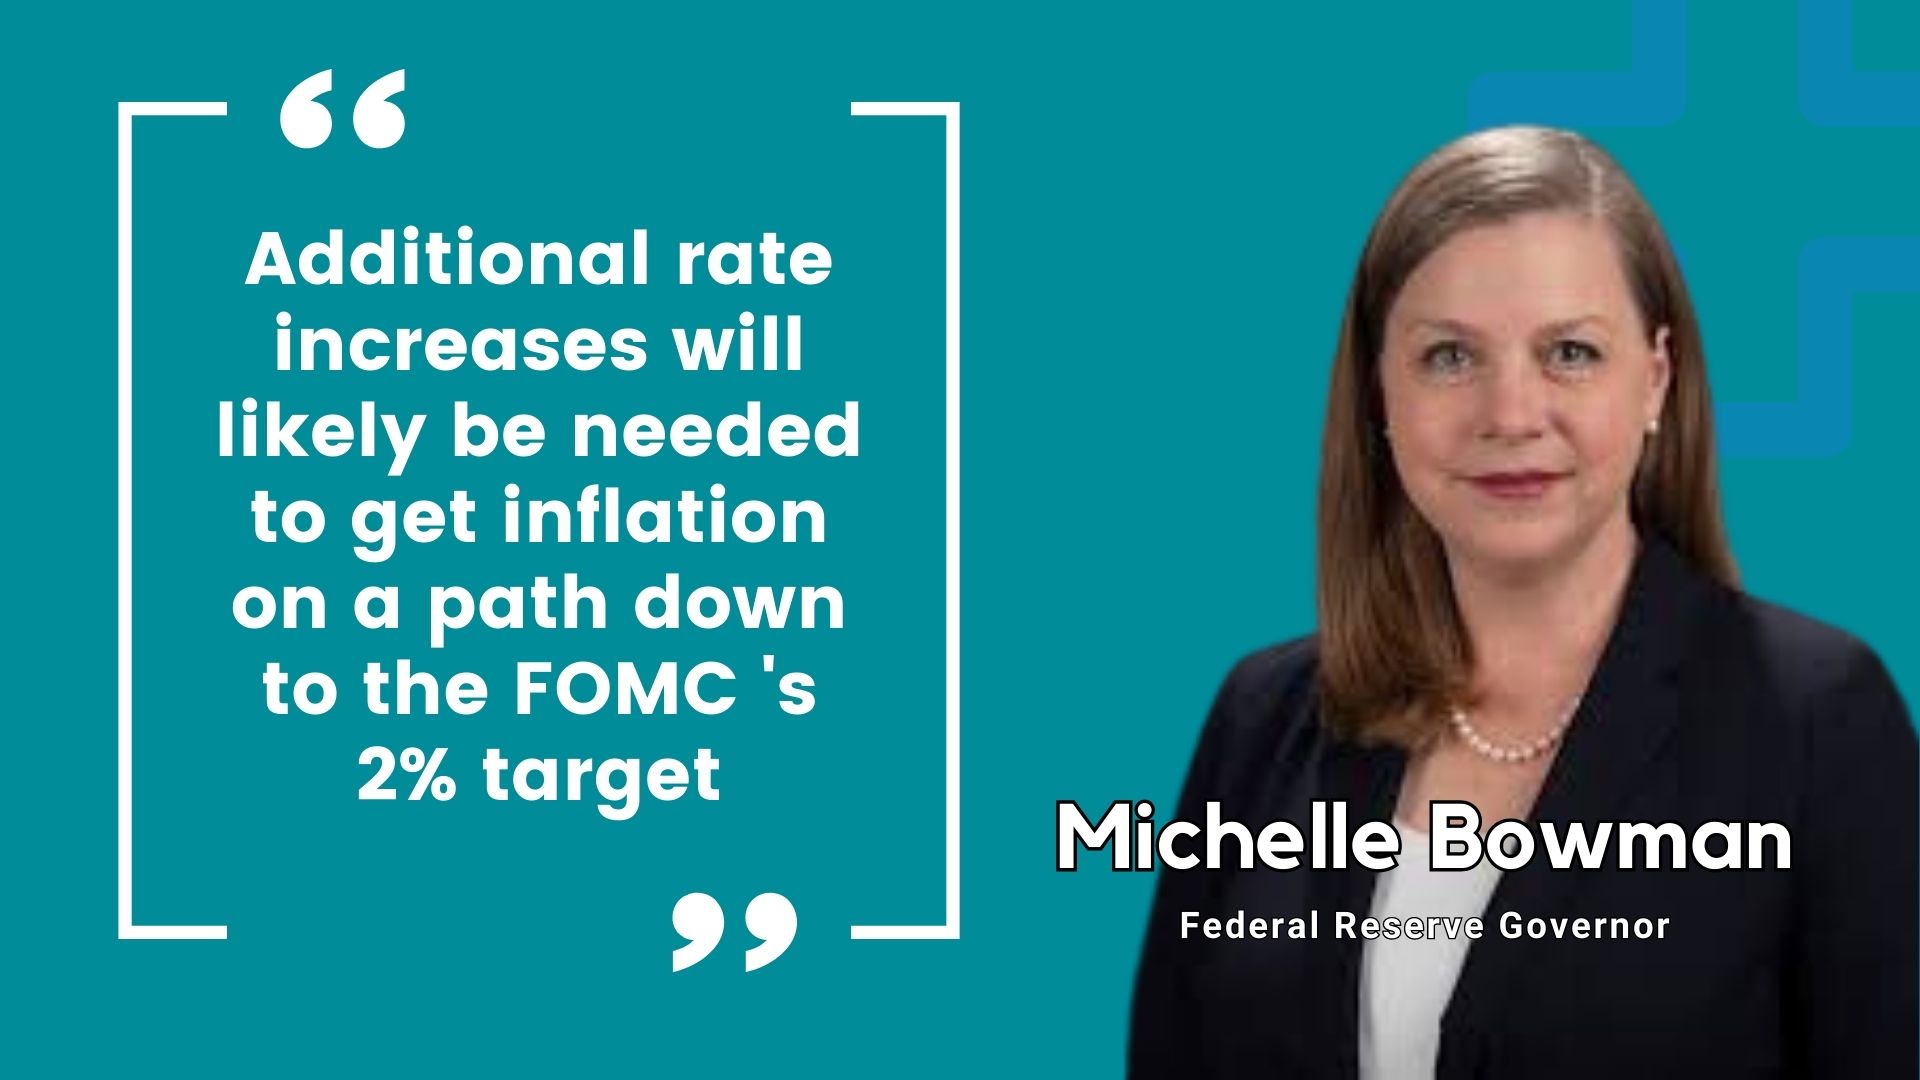 Federal Reserve Governor Michelle Bowman on additional rate hikes